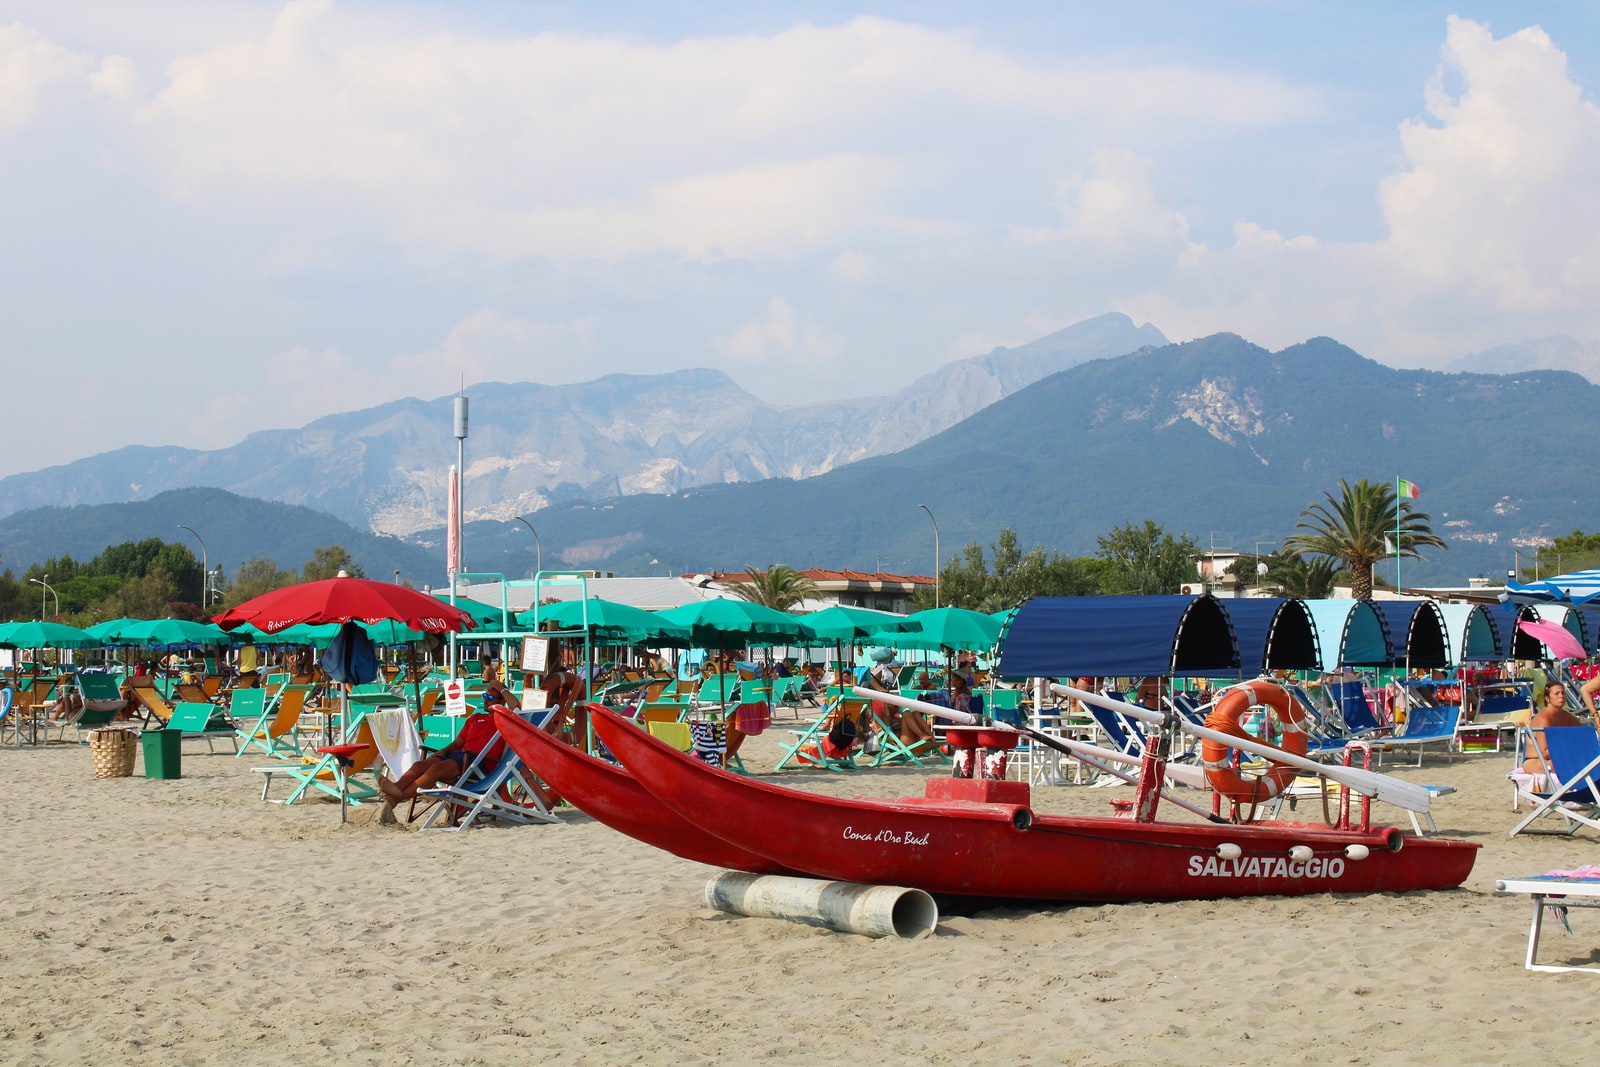 red boat on beach during daytime